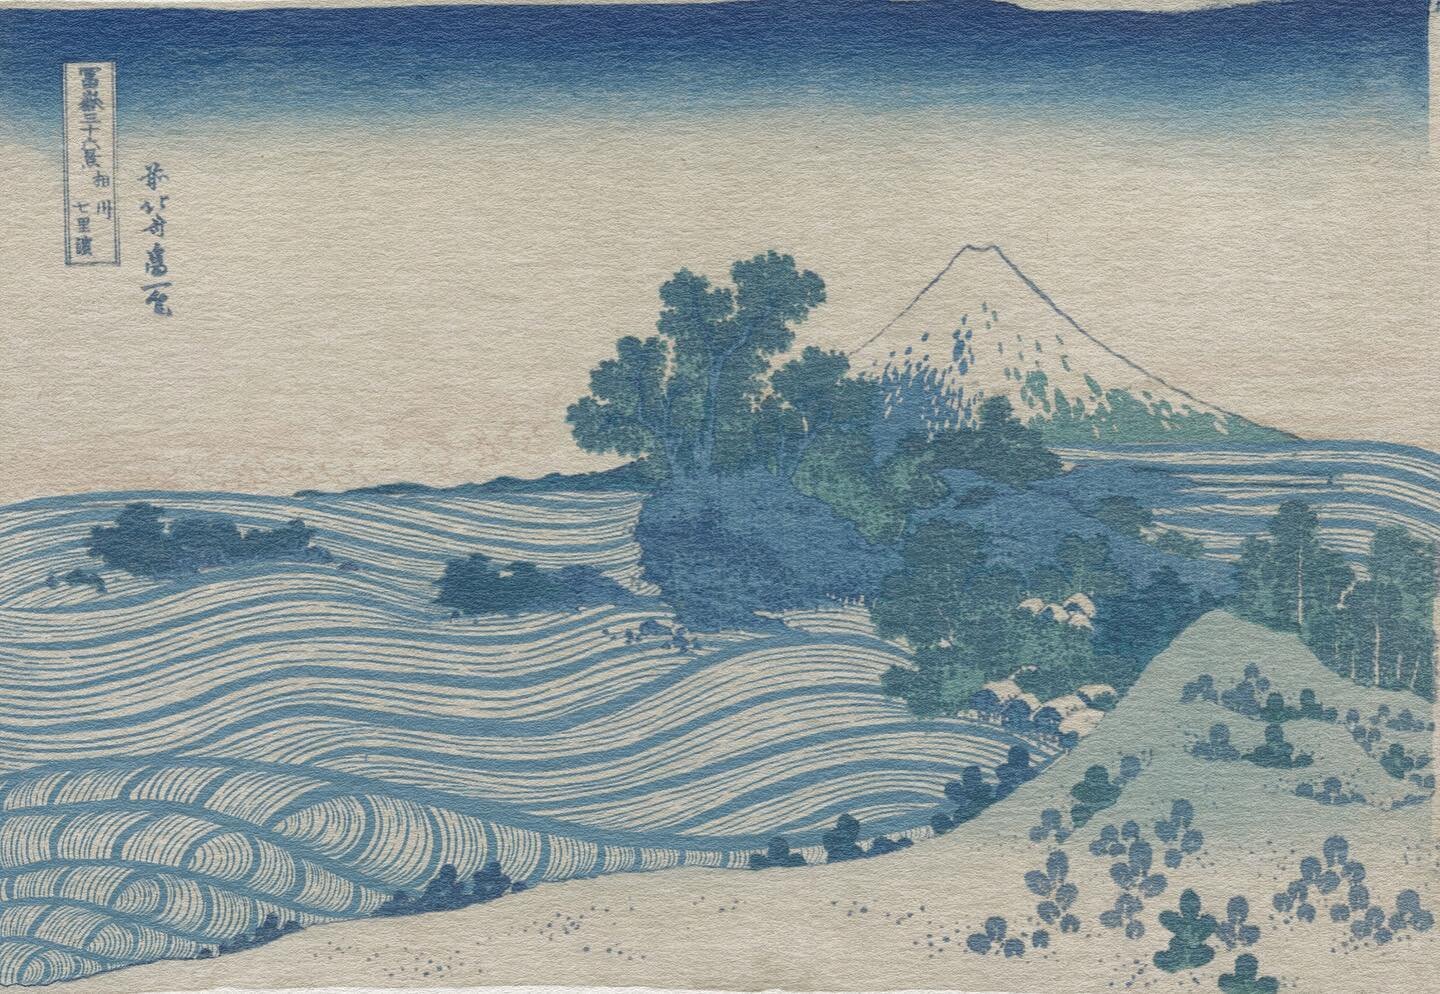 🌸 #rscospring Day 7🌸
A &ldquo;collab&rdquo; with one of the great masters of art history - Hokusai. Most famously known for the &ldquo;Great Wave&rdquo;, his work has become iconic across cultures &amp; throughout time.
🌊
I&rsquo;ve had multiple f